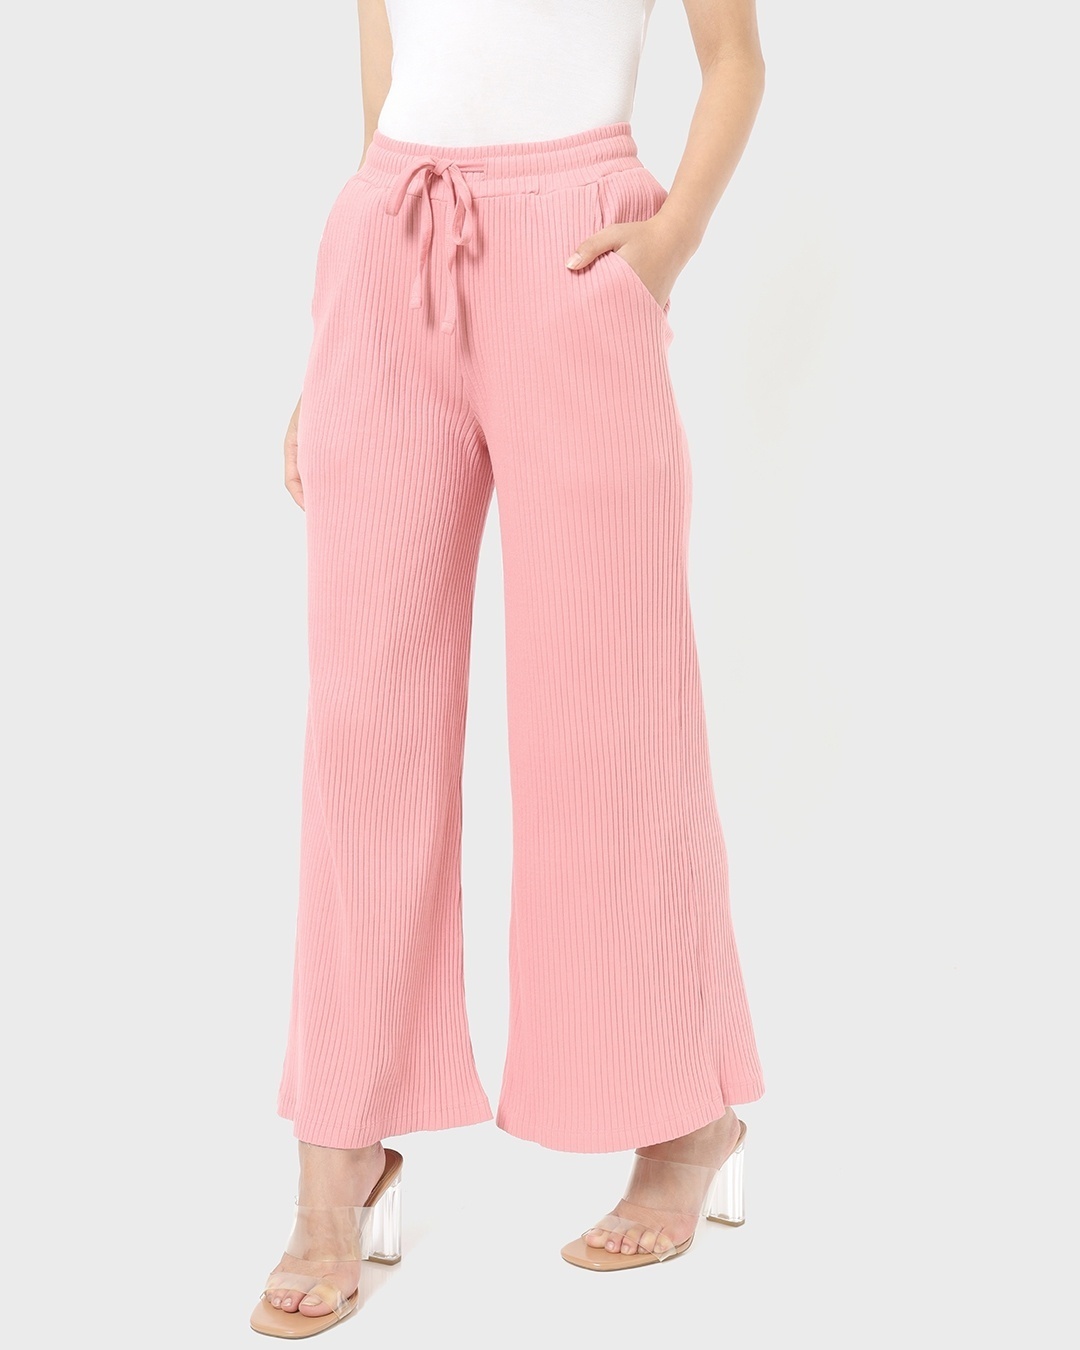 Shop Pink Wide leeged Casual Pants-Front